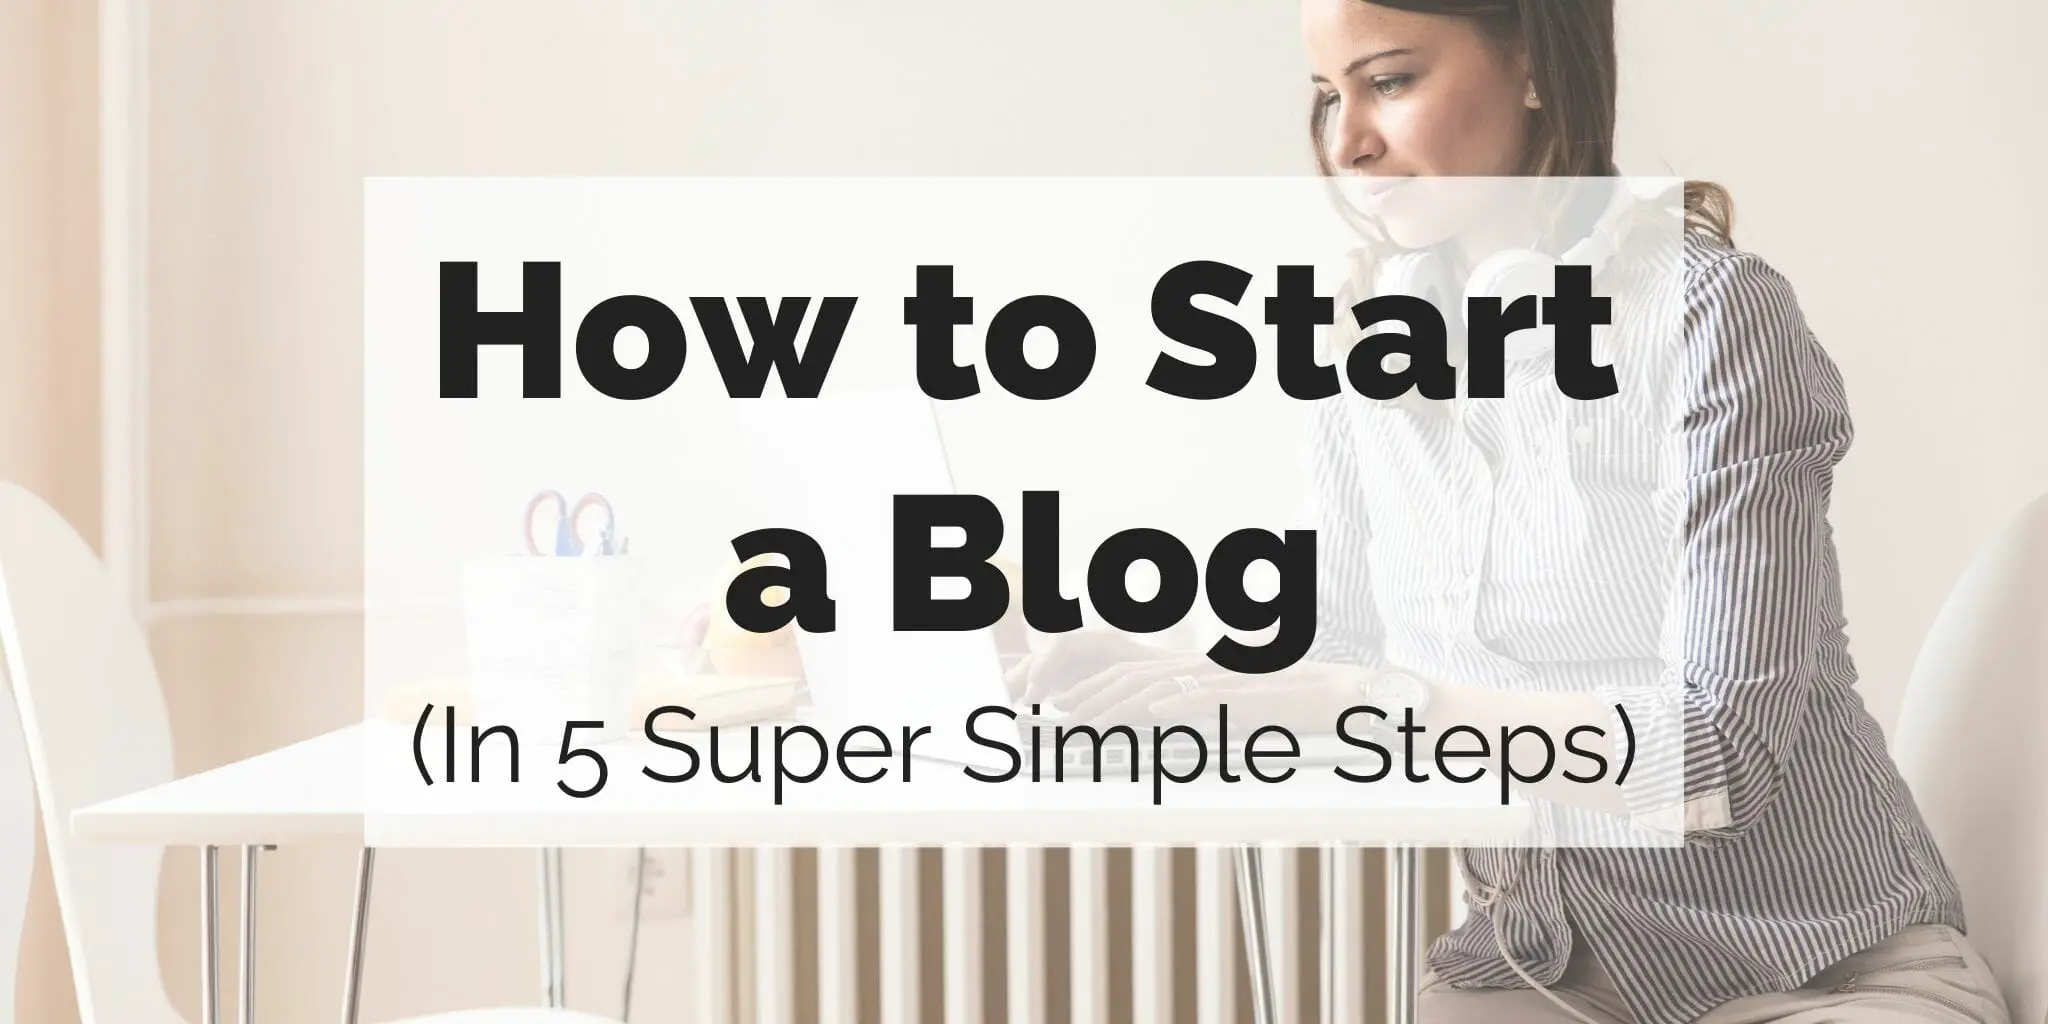 Woman on computer in white room with text "how to start a blog in 5 simple steps" superimposed over the photo.